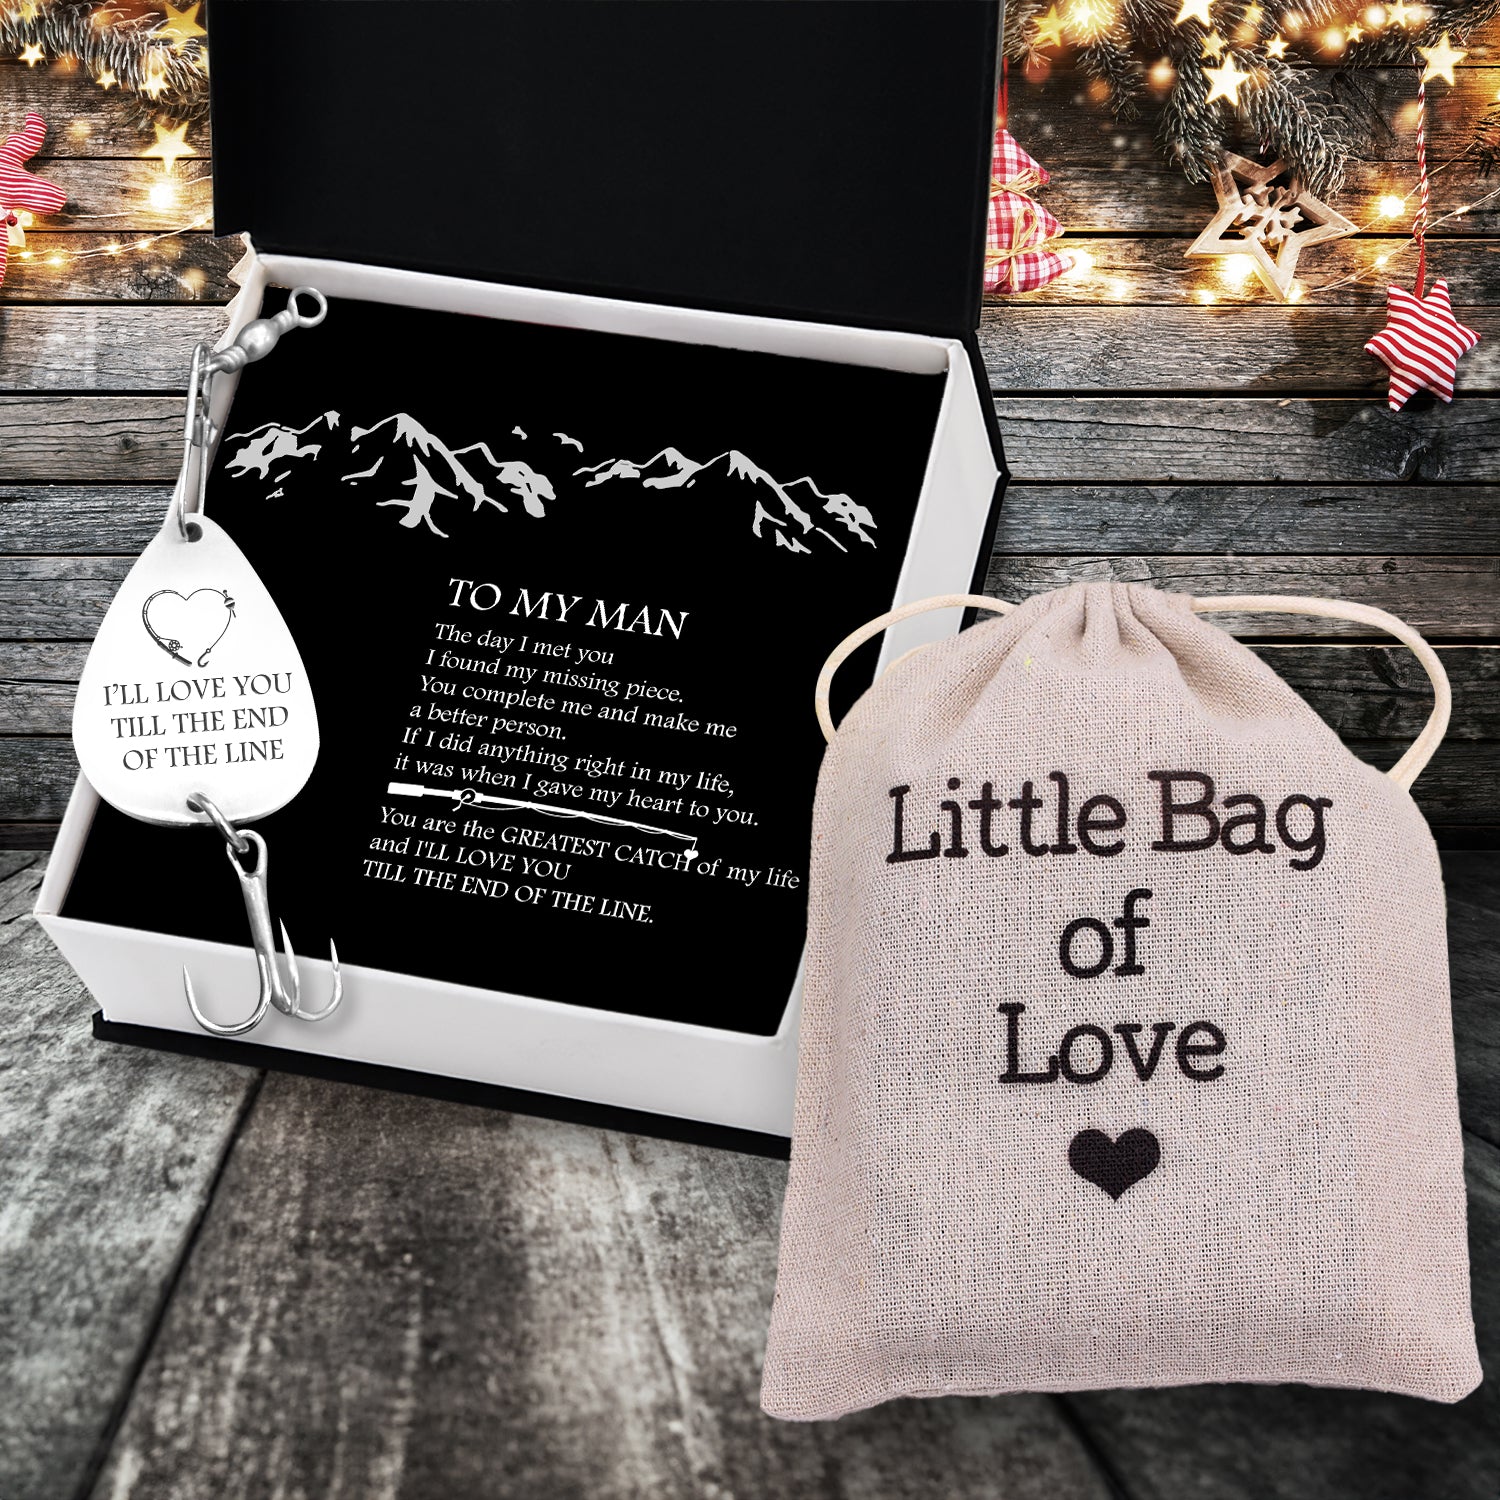 Christmas Catch of a Lifetime! Engrave Your Love on His Hook - Gfa26003